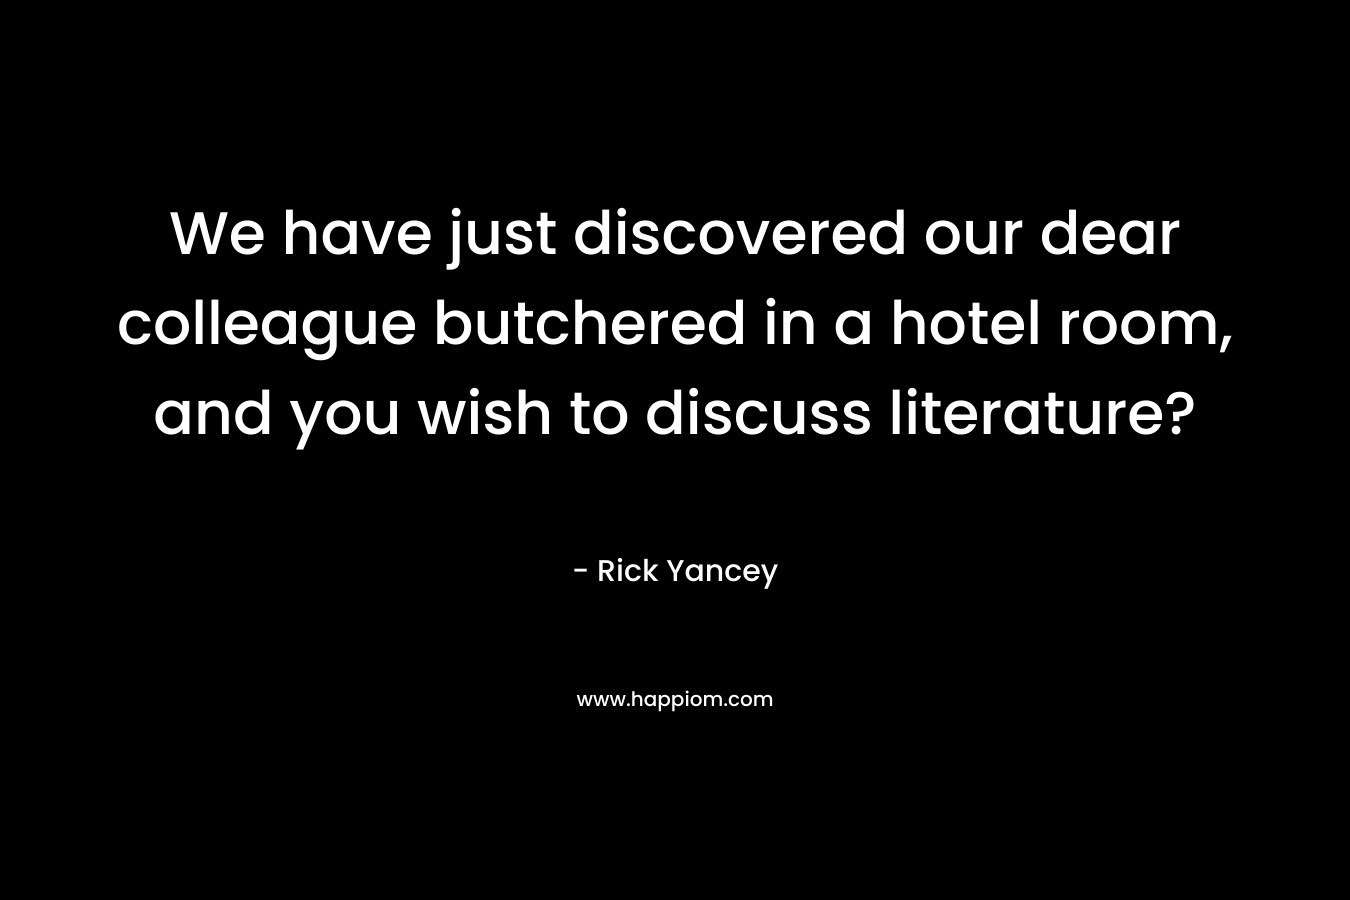 We have just discovered our dear colleague butchered in a hotel room, and you wish to discuss literature? – Rick Yancey